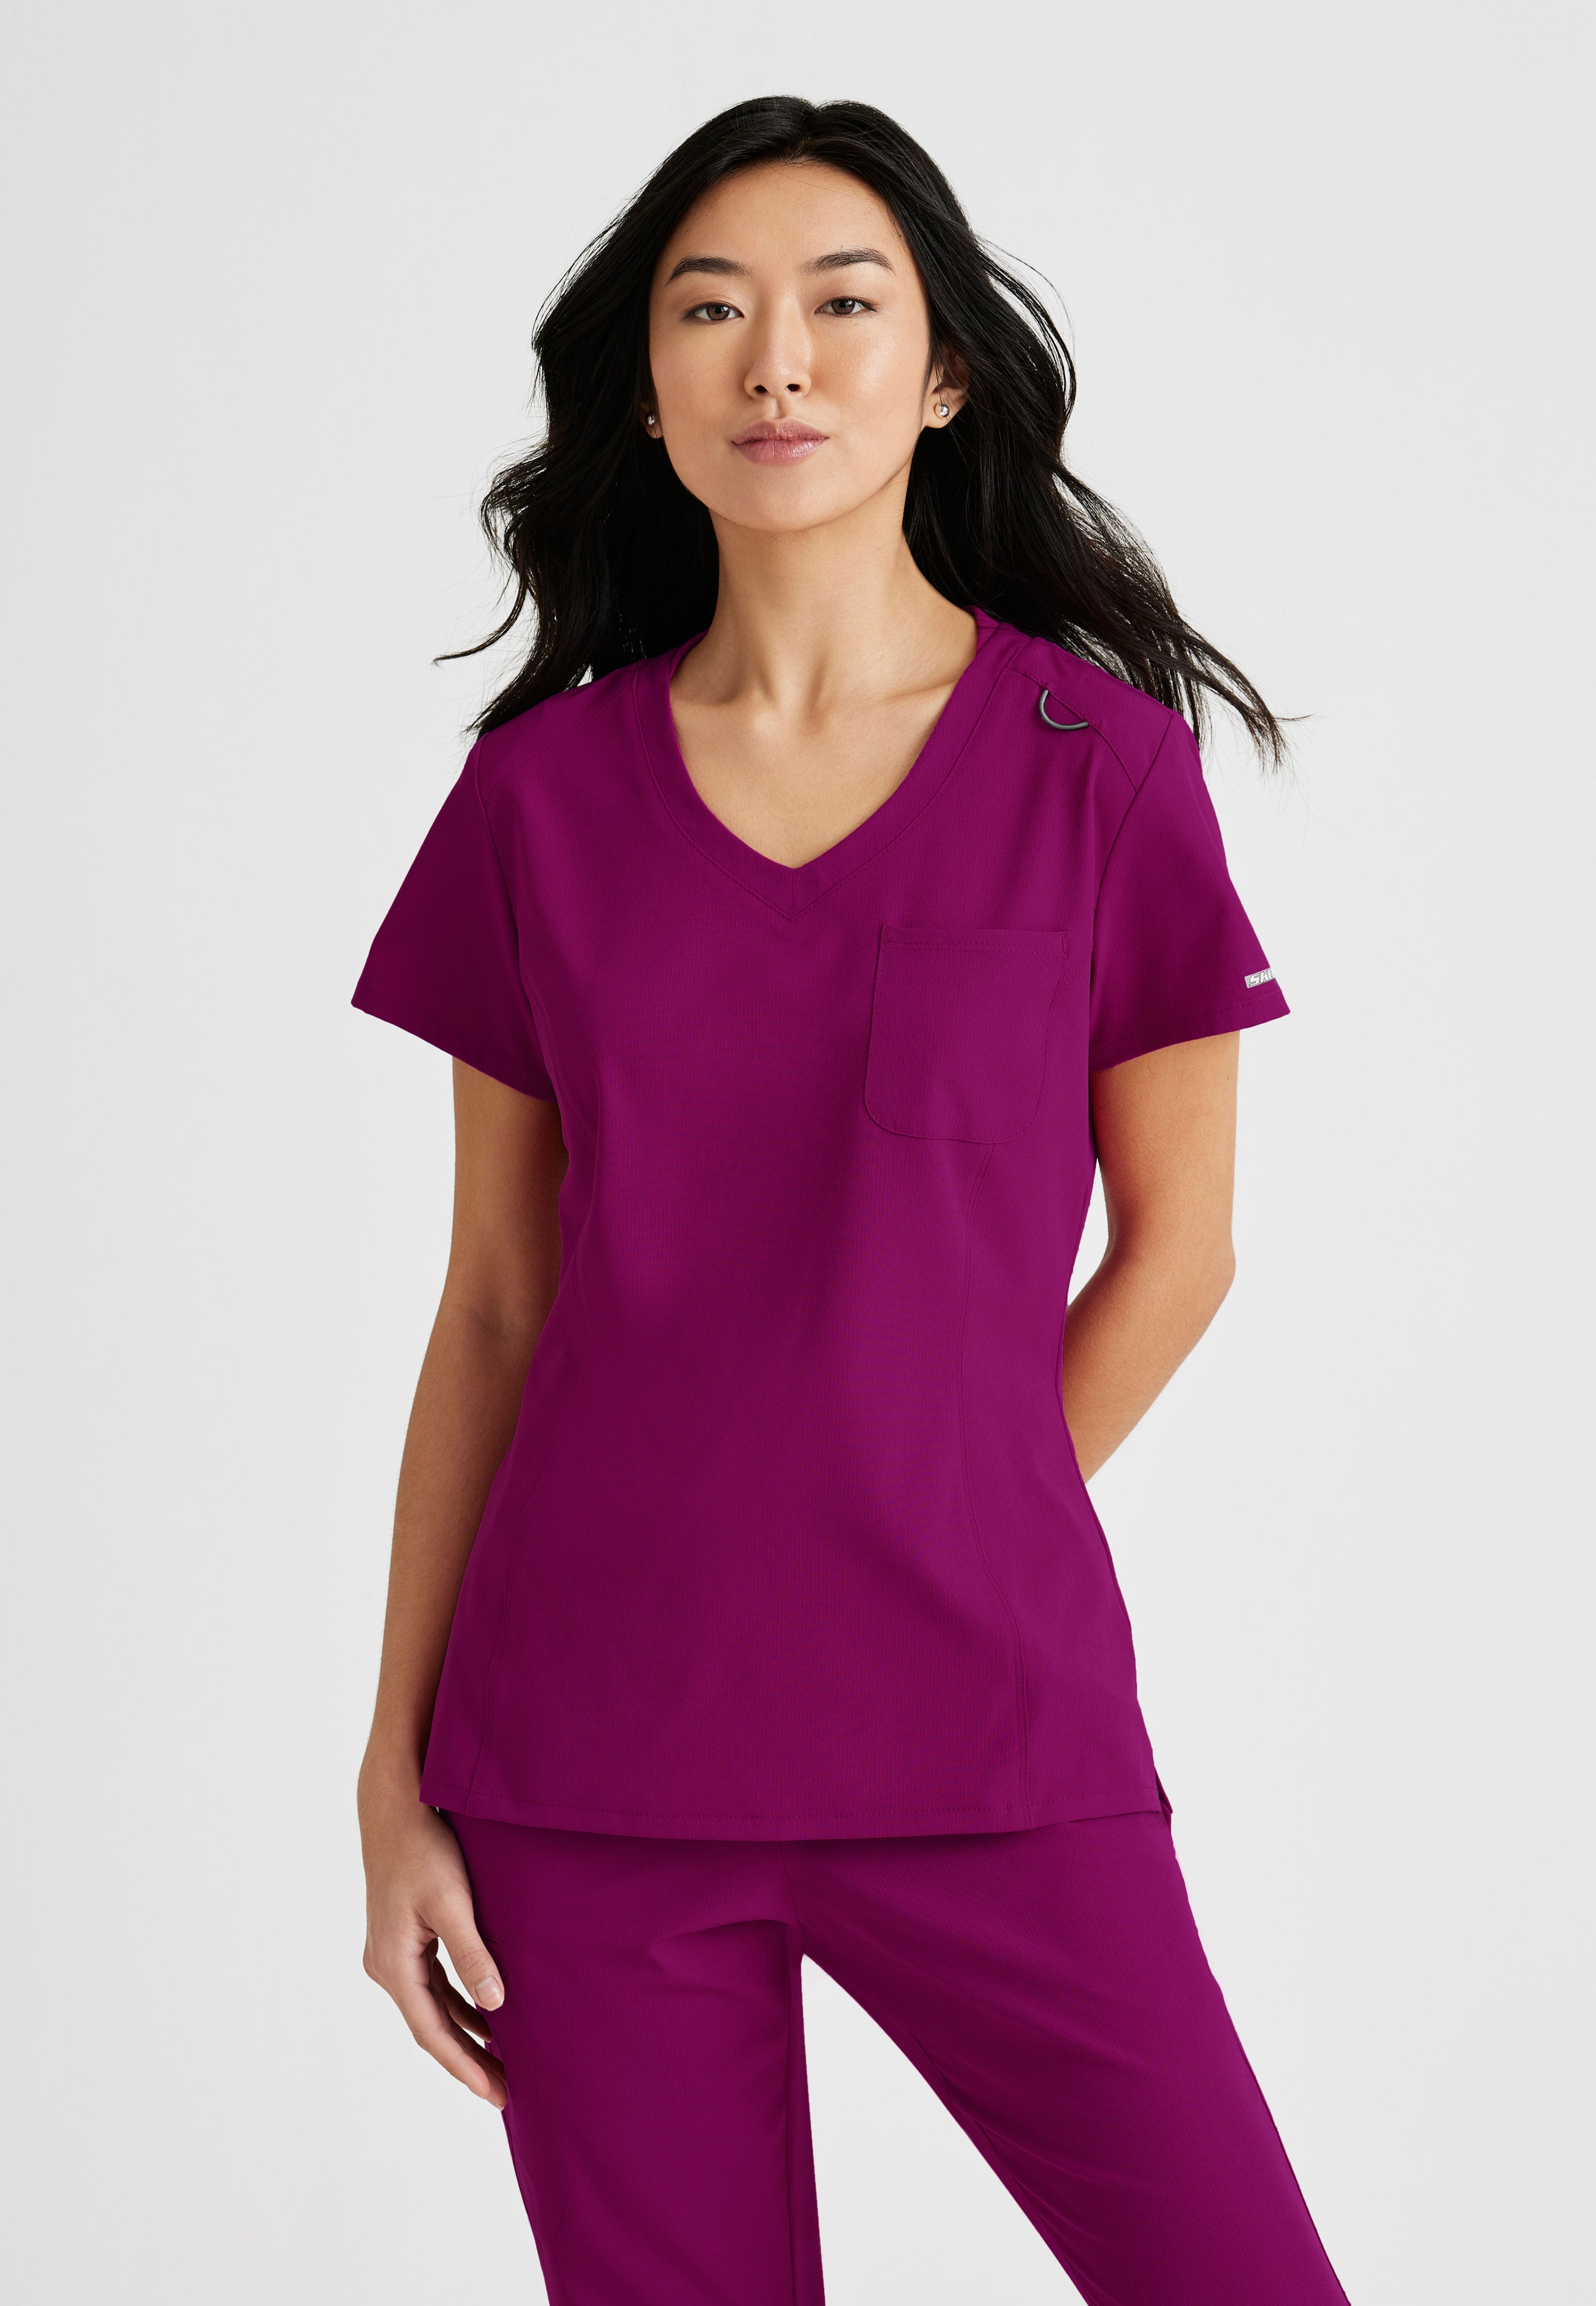 Skechers by Barco Dignity Women's 1-Pocket STRETCH Tuck In V-Neck Scrub Top